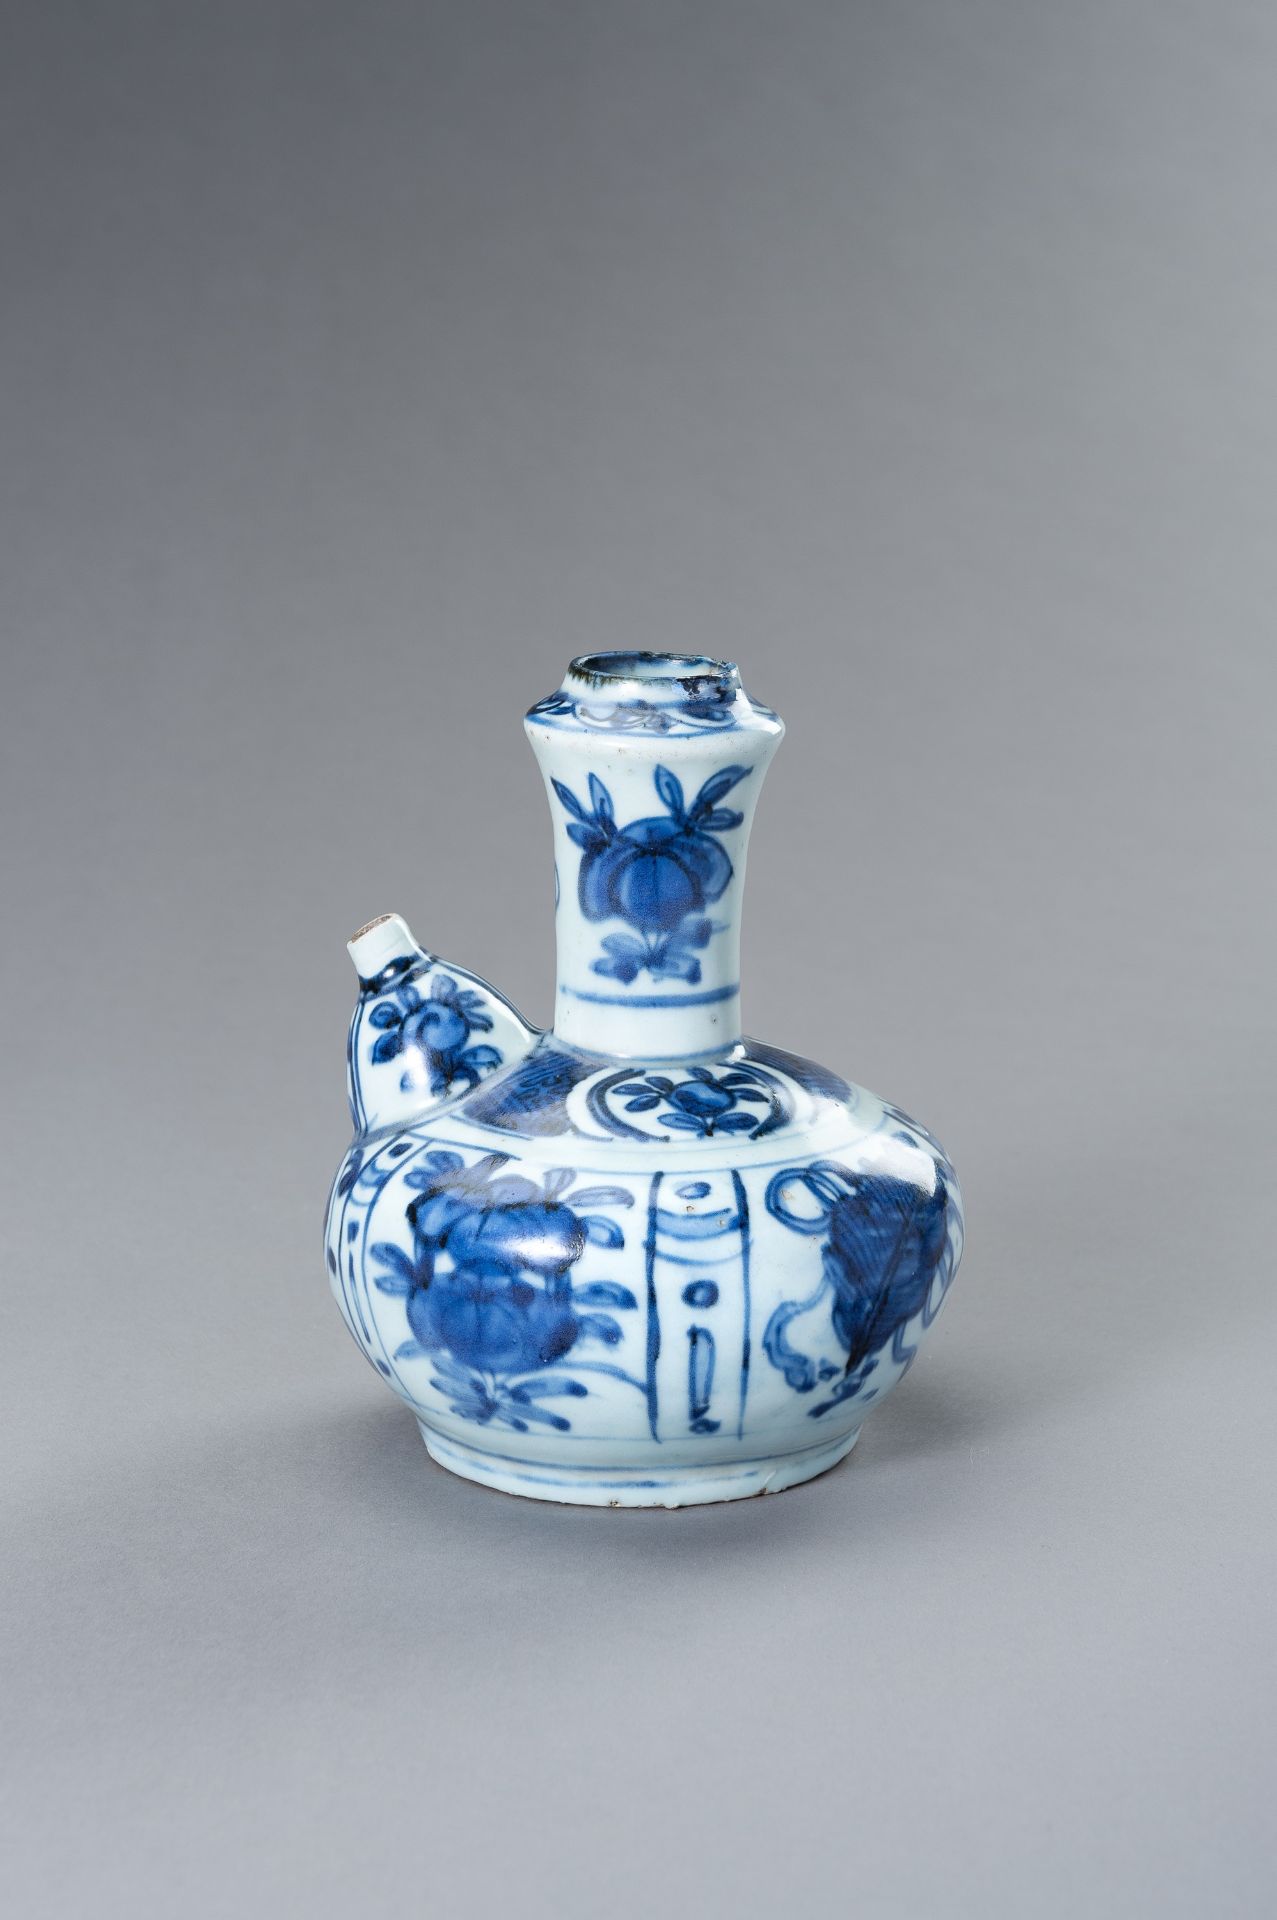 A BLUE AND WHITE PORCELAIN POURING VESSEL (KENDI) WITH FLORAL MOTIFS